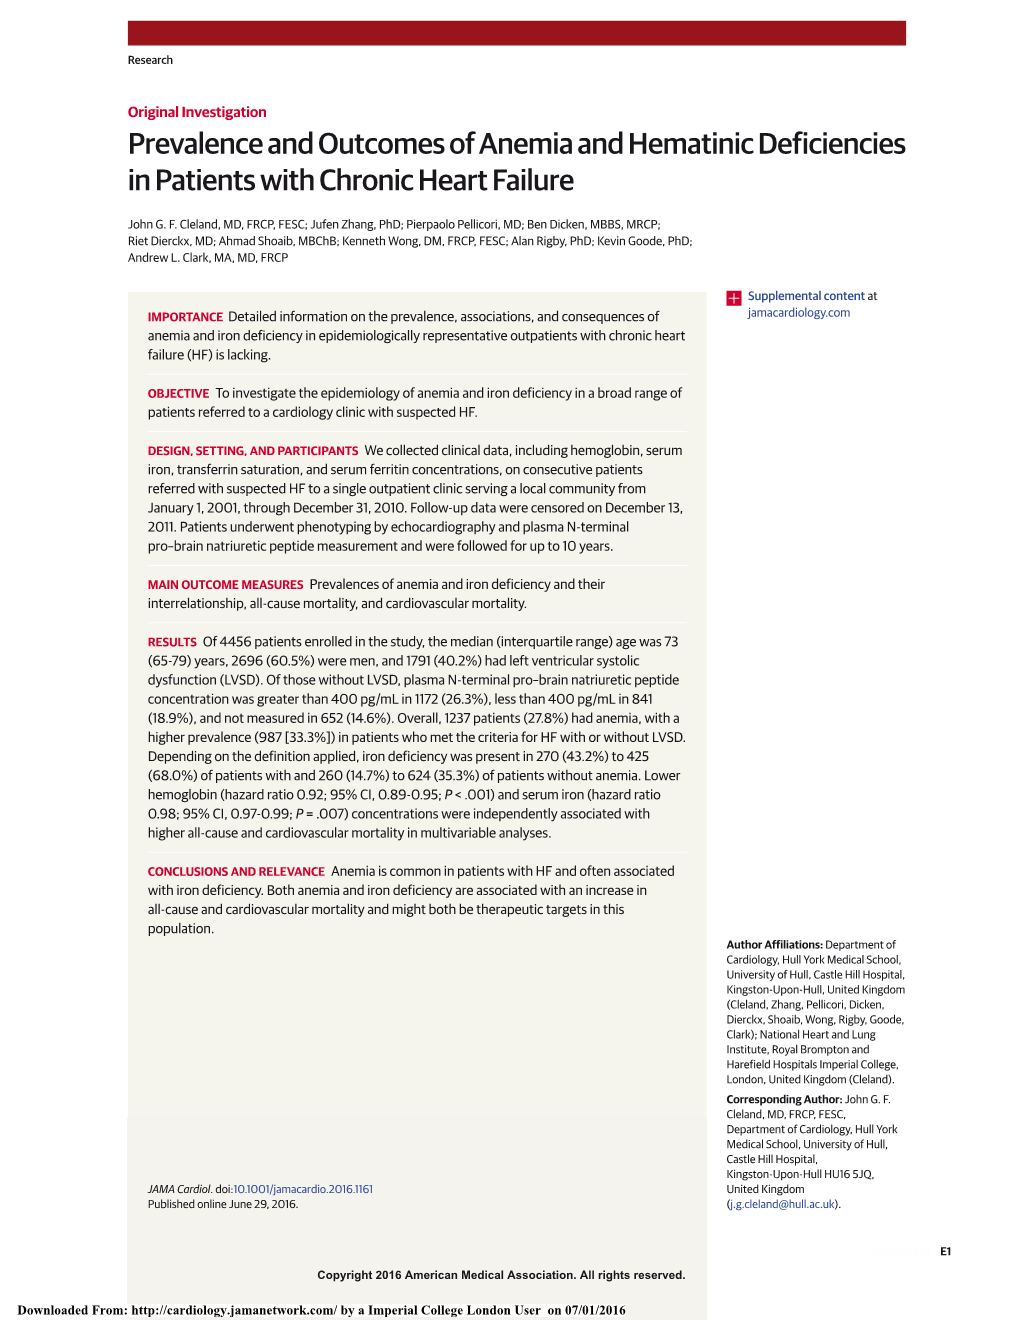 Prevalence and Outcomes of Anemia and Hematinic Deficiencies in Patients with Chronic Heart Failure